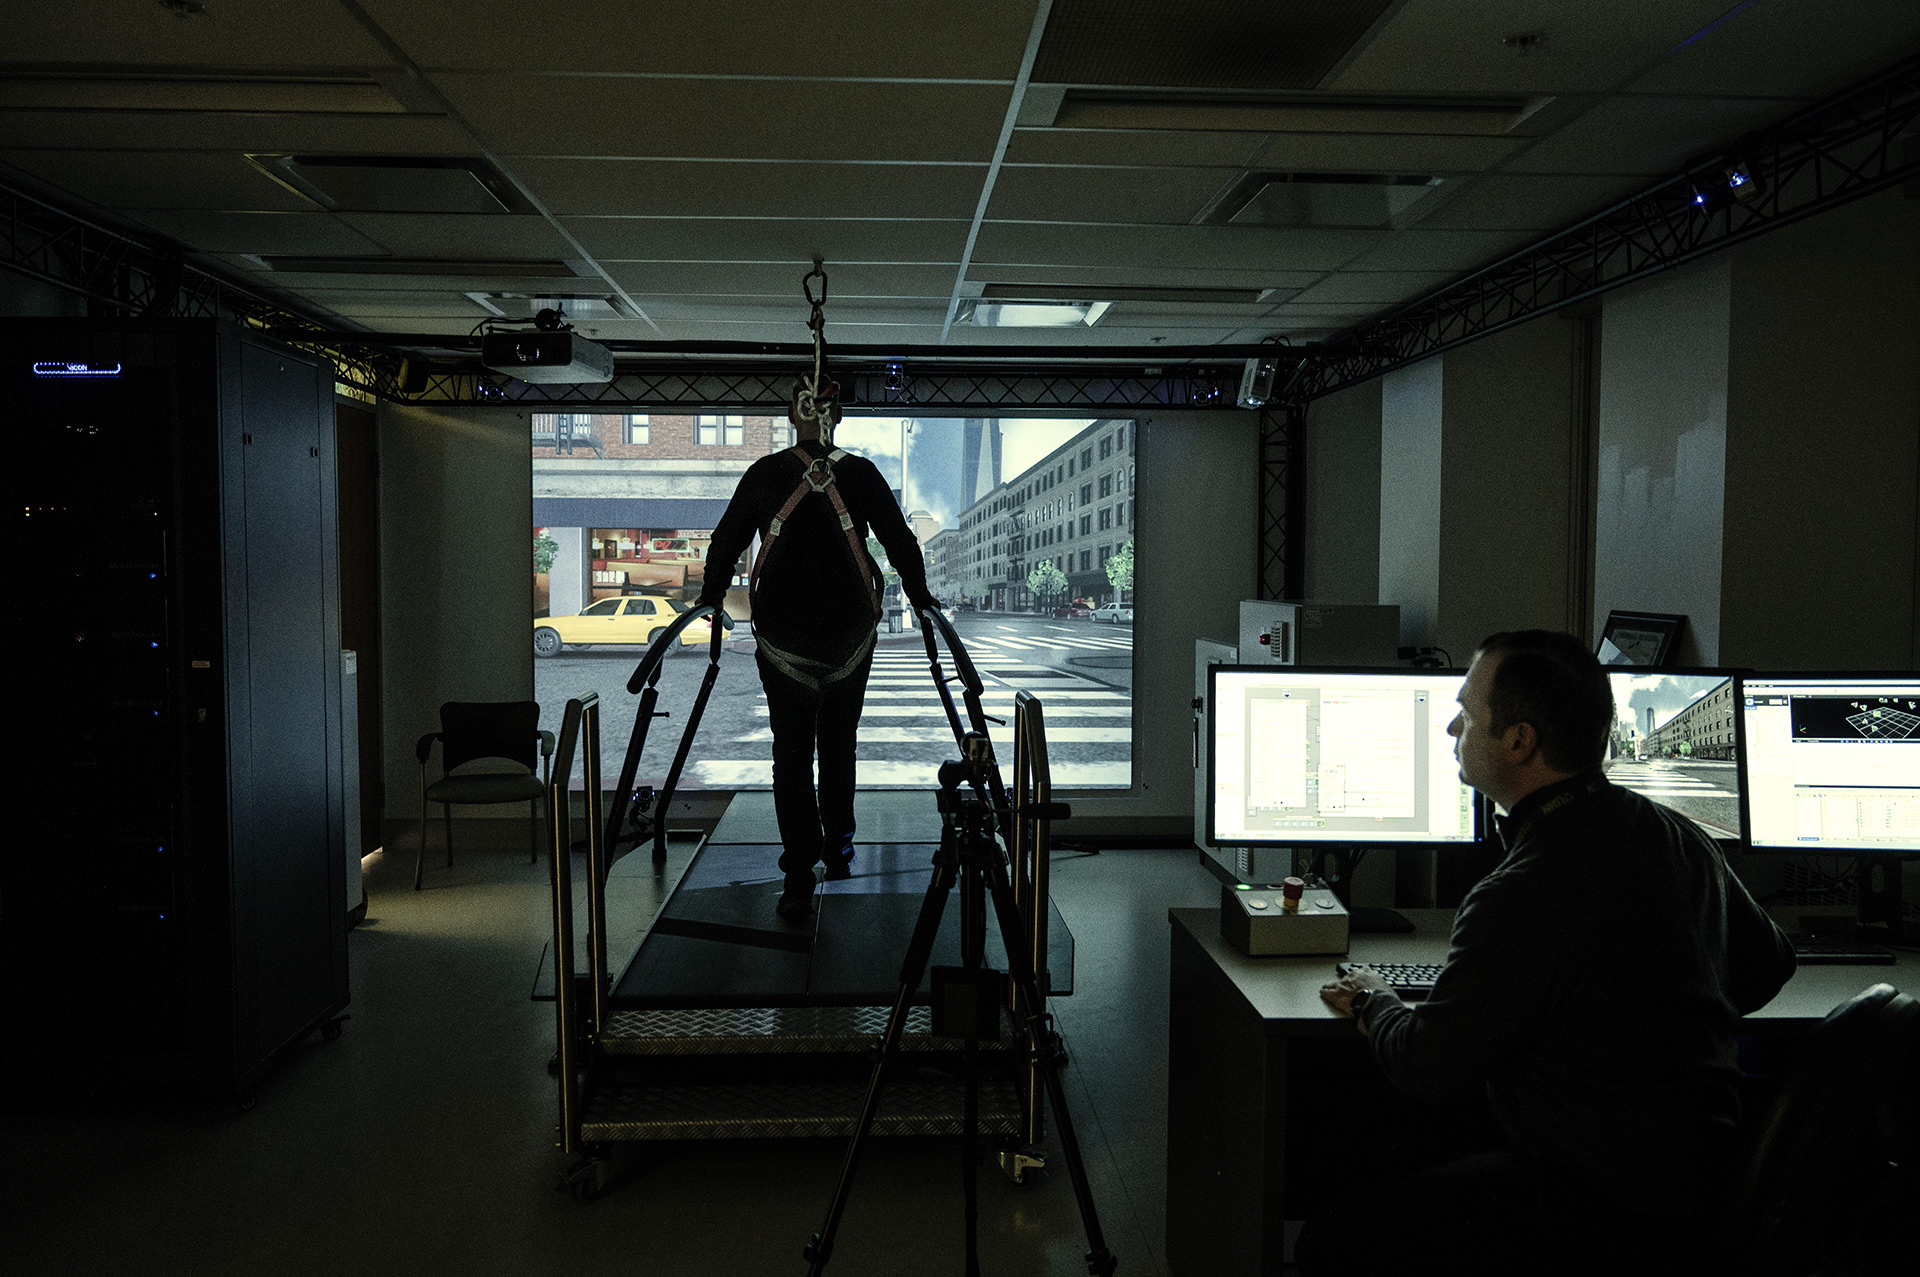 Kinesiologist monitoring a patient strapped in a safety harness inside the Gait Lab experiencing the immersive rehabilitation research space.